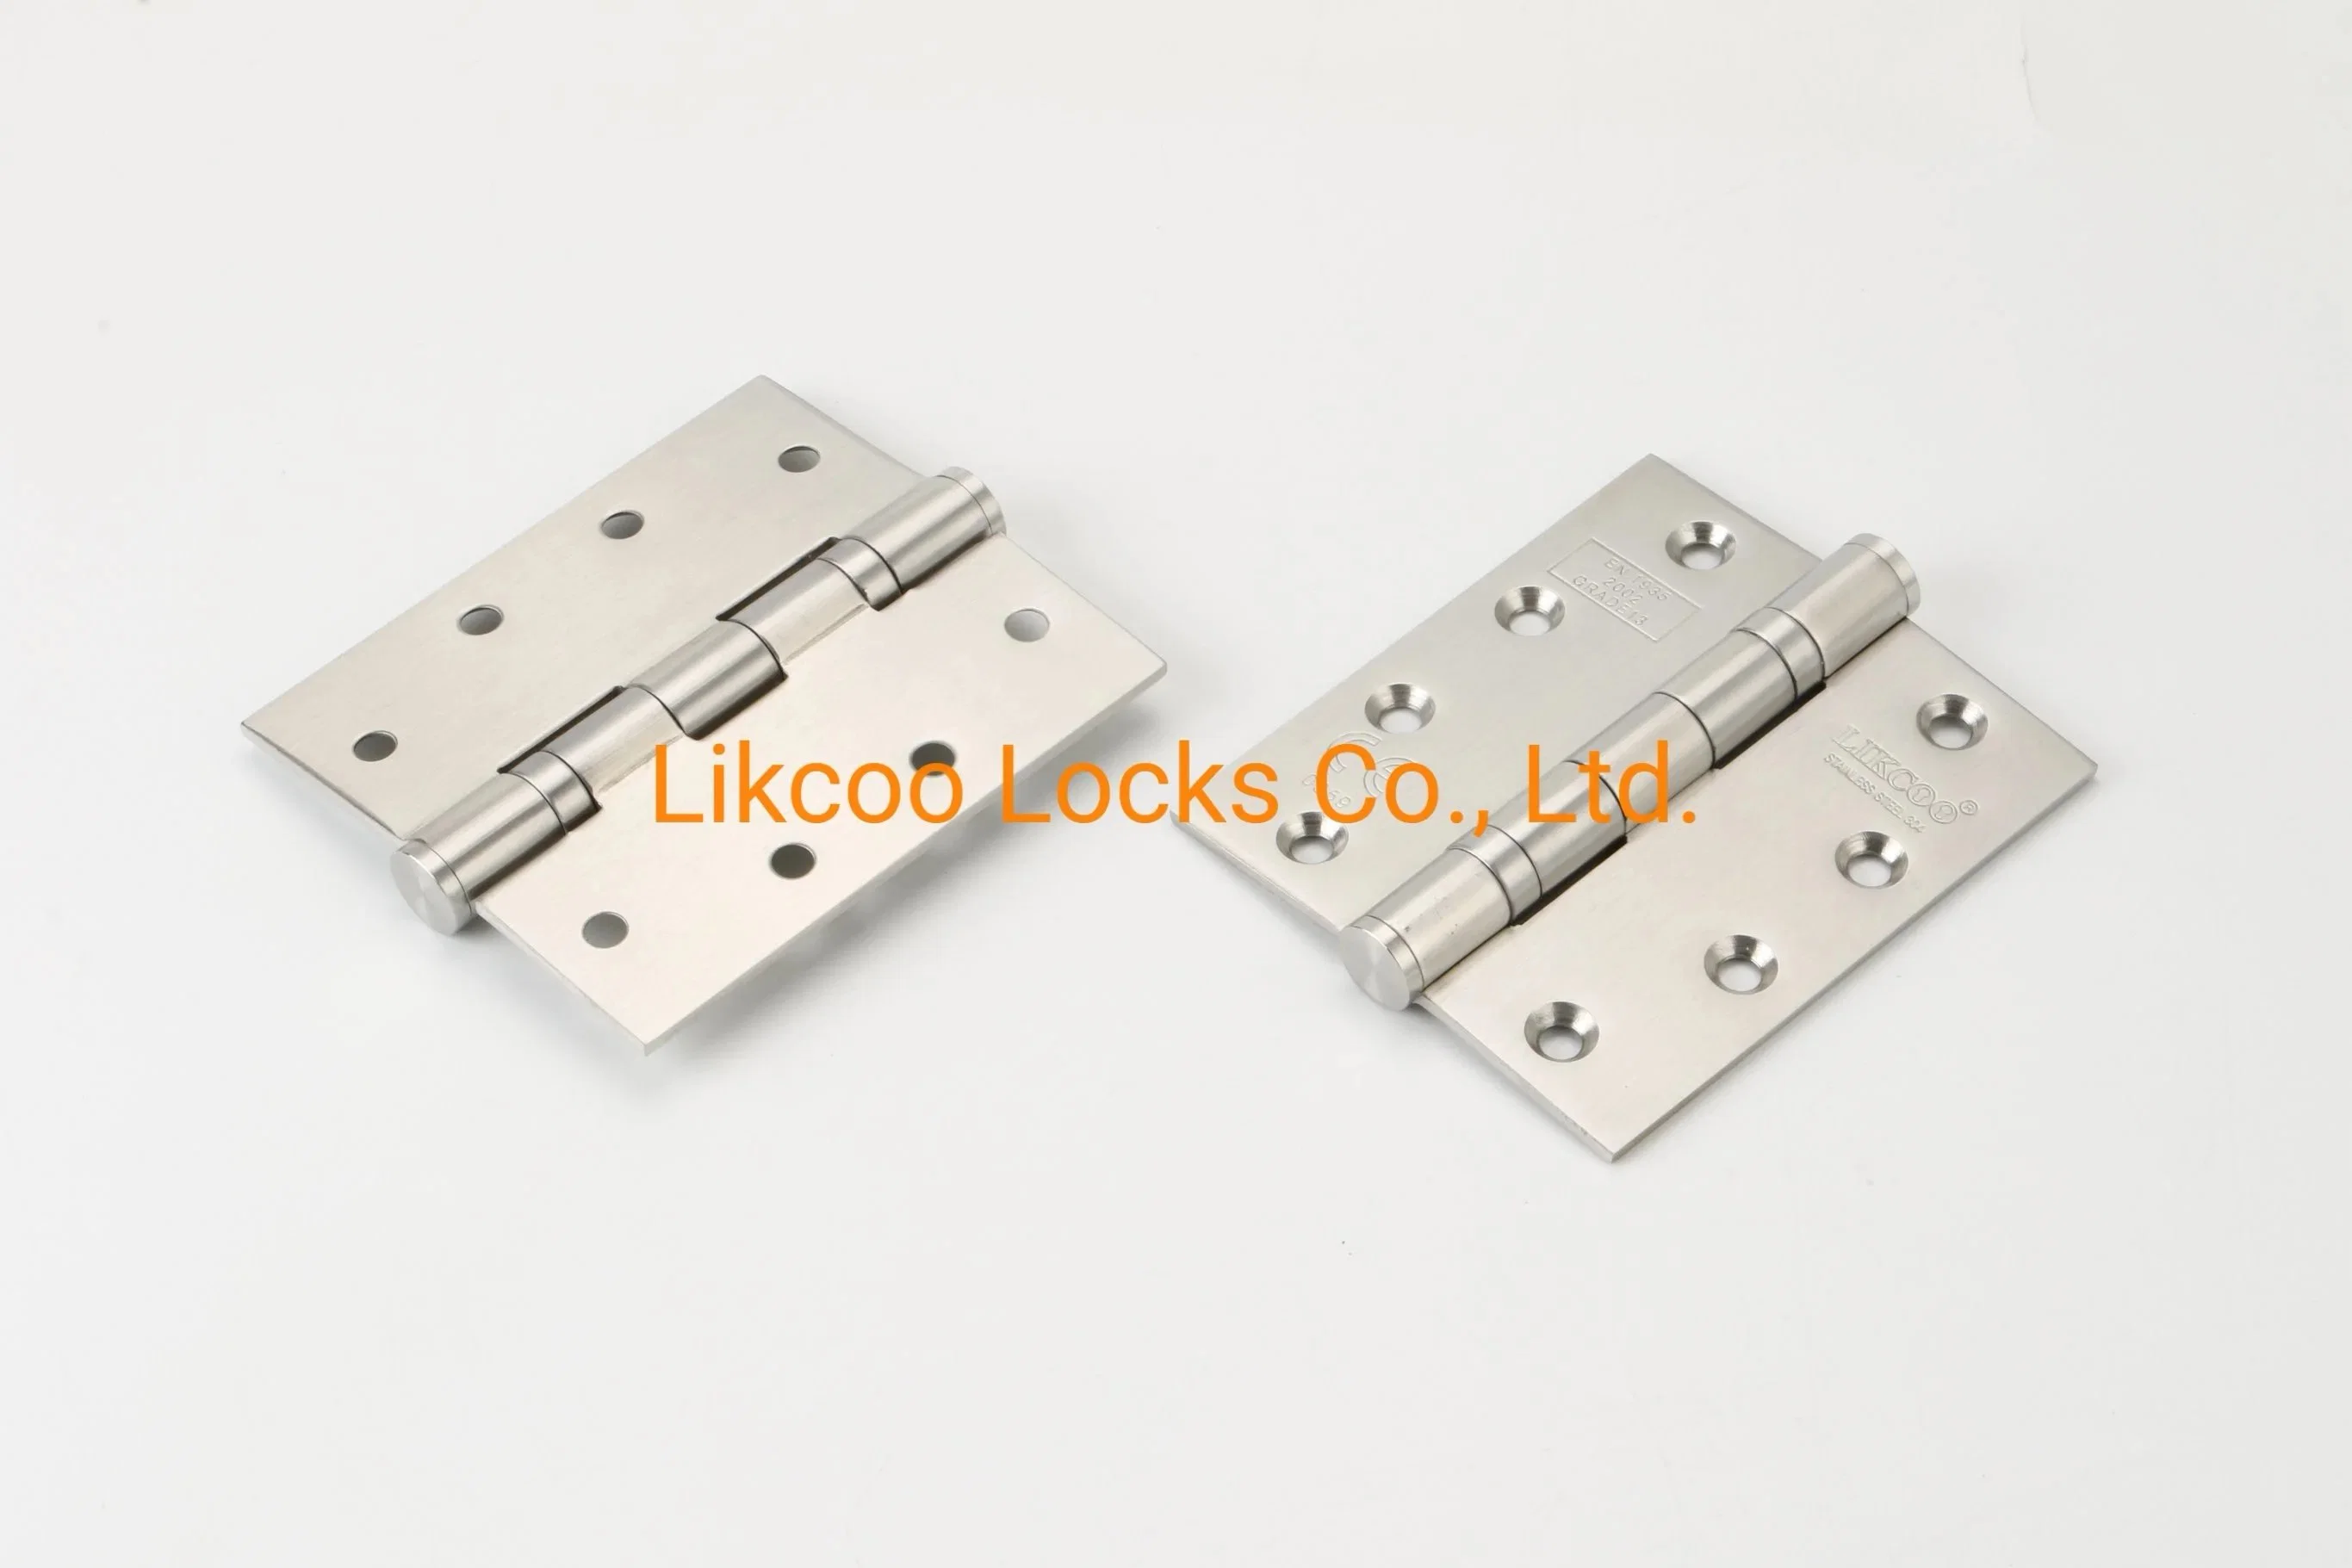 Stainless Steel 304 ANSI Fire Rated Door Hinge UL&Ce Listed Door Hardware (SSA001)